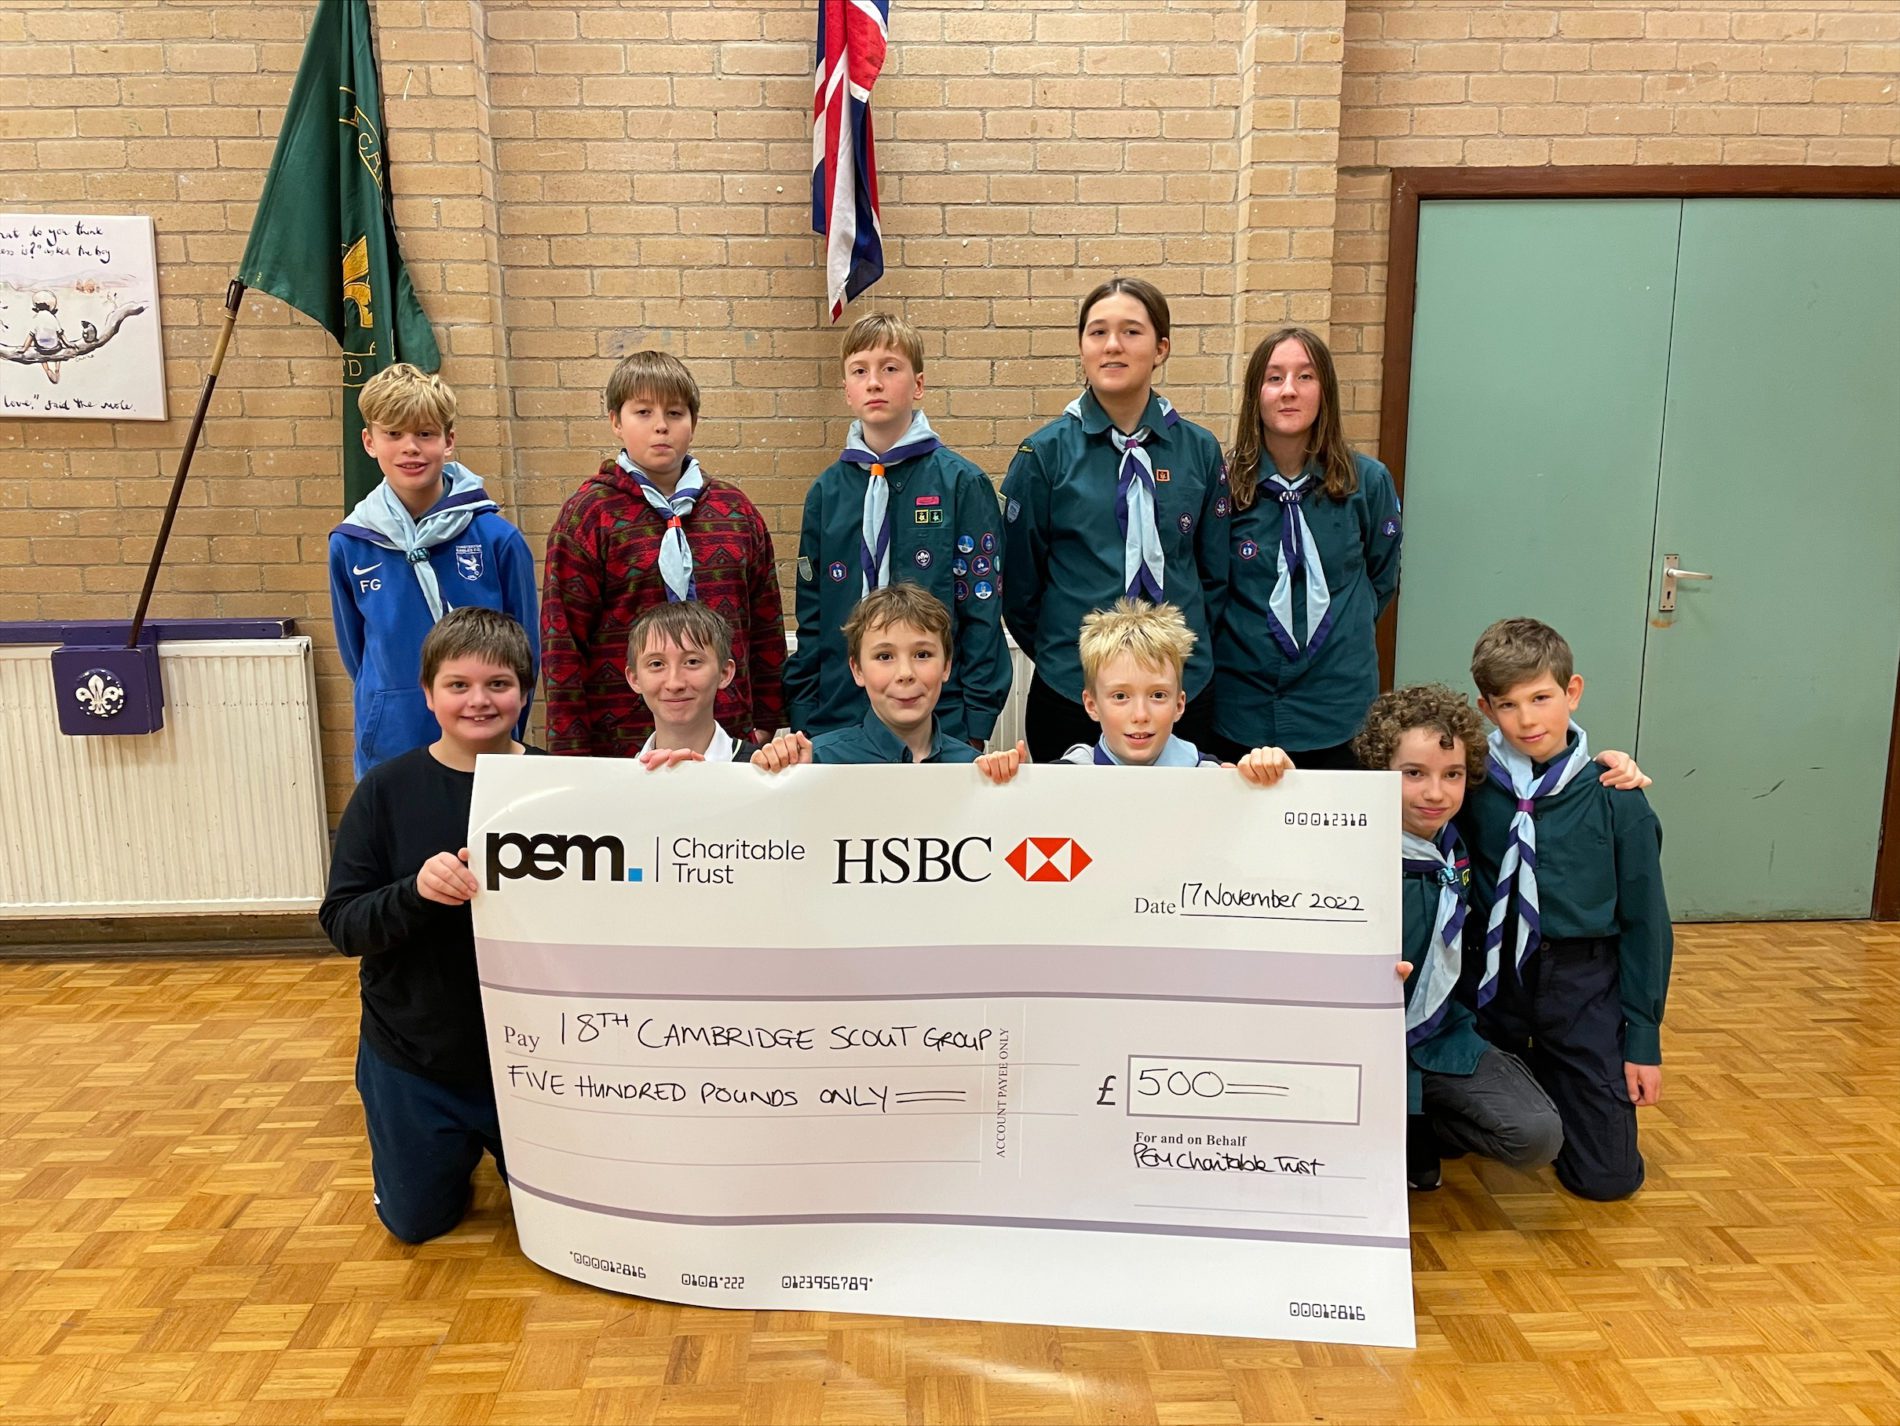 18th Scout Group in Cambridge receiving PEM Charitable Trust Donation 